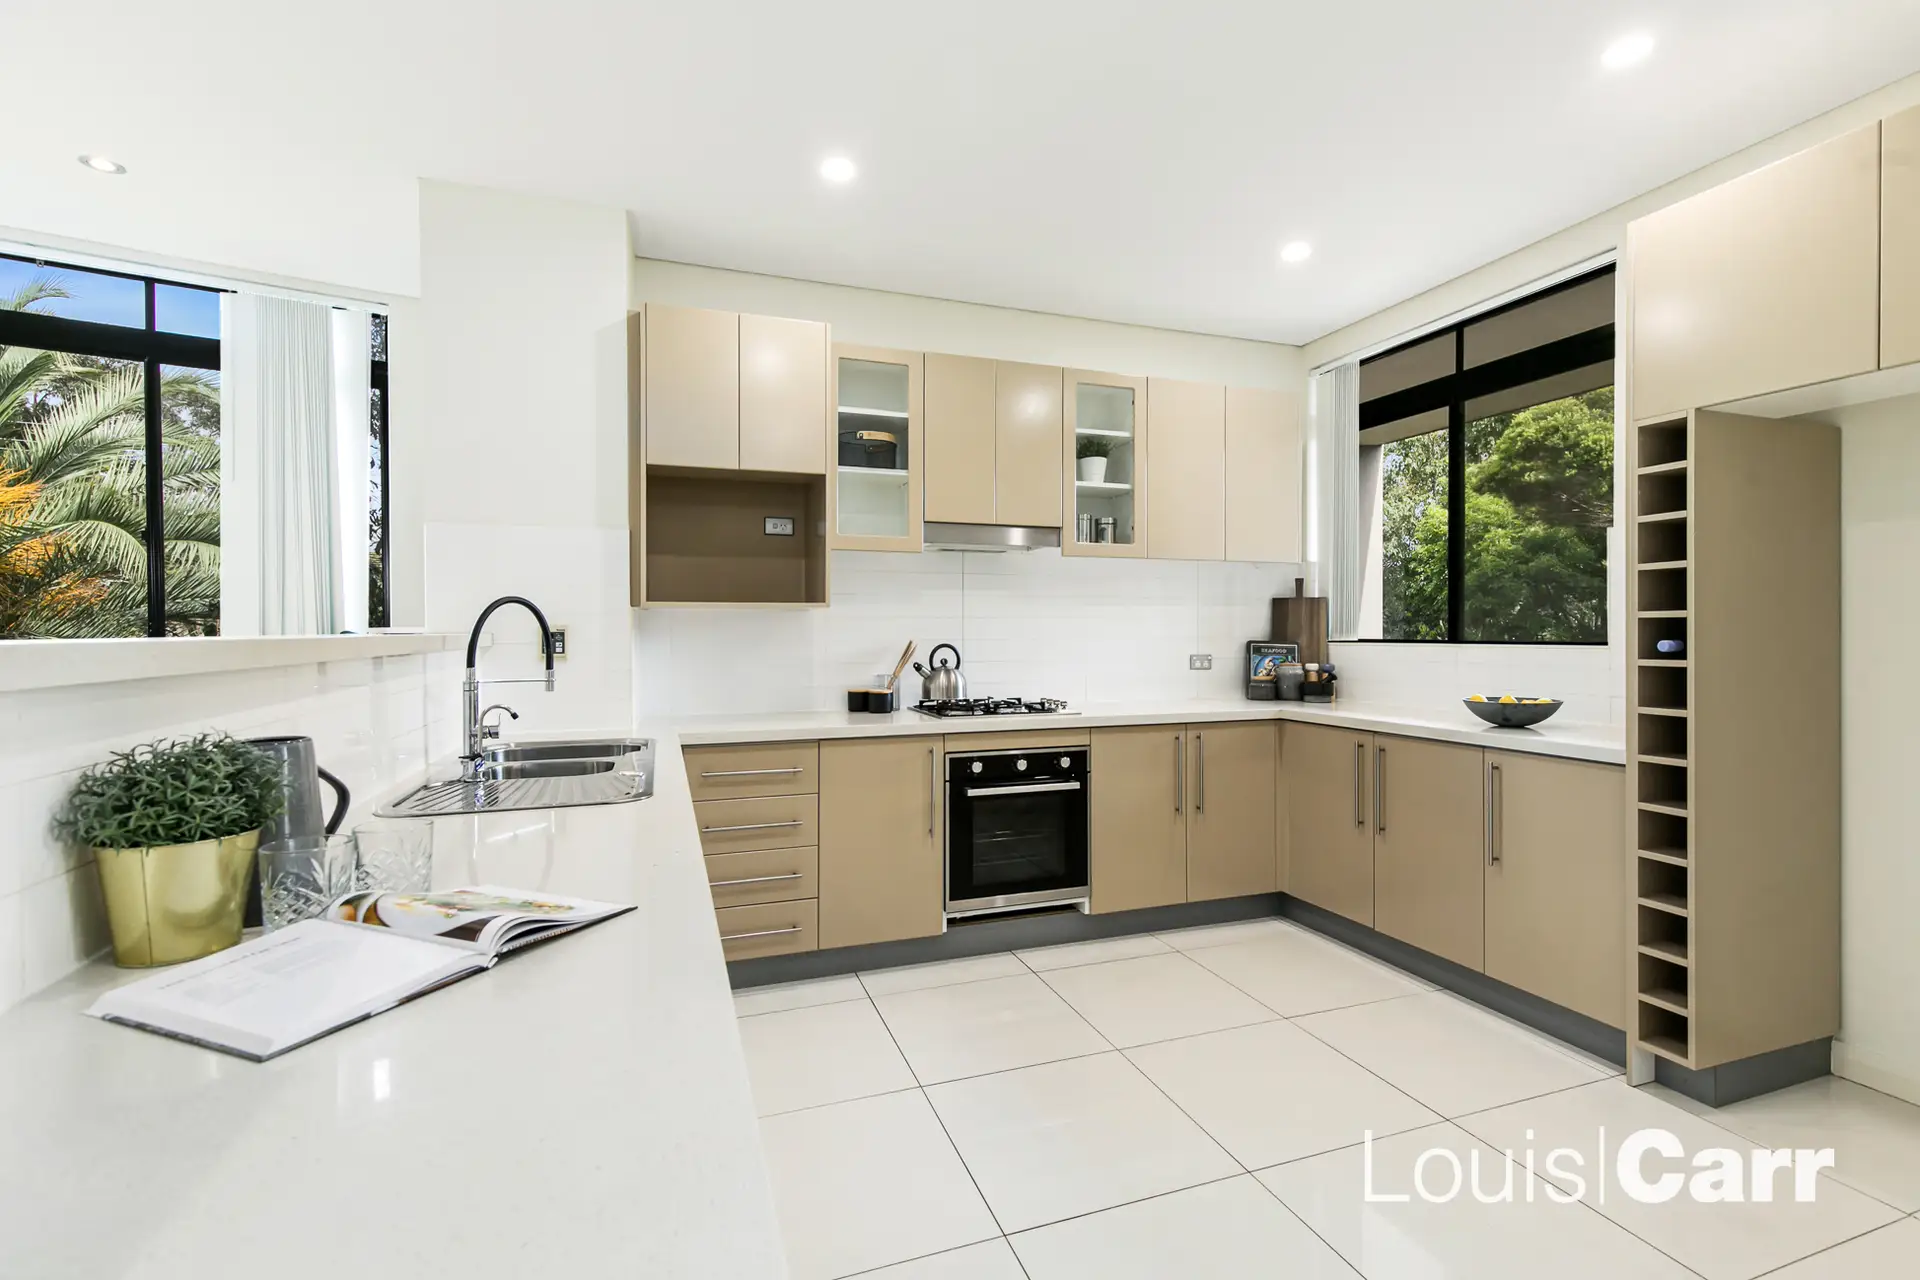 Photo #3: 101/2-4 Purser Avenue, Castle Hill - Sold by Louis Carr Real Estate